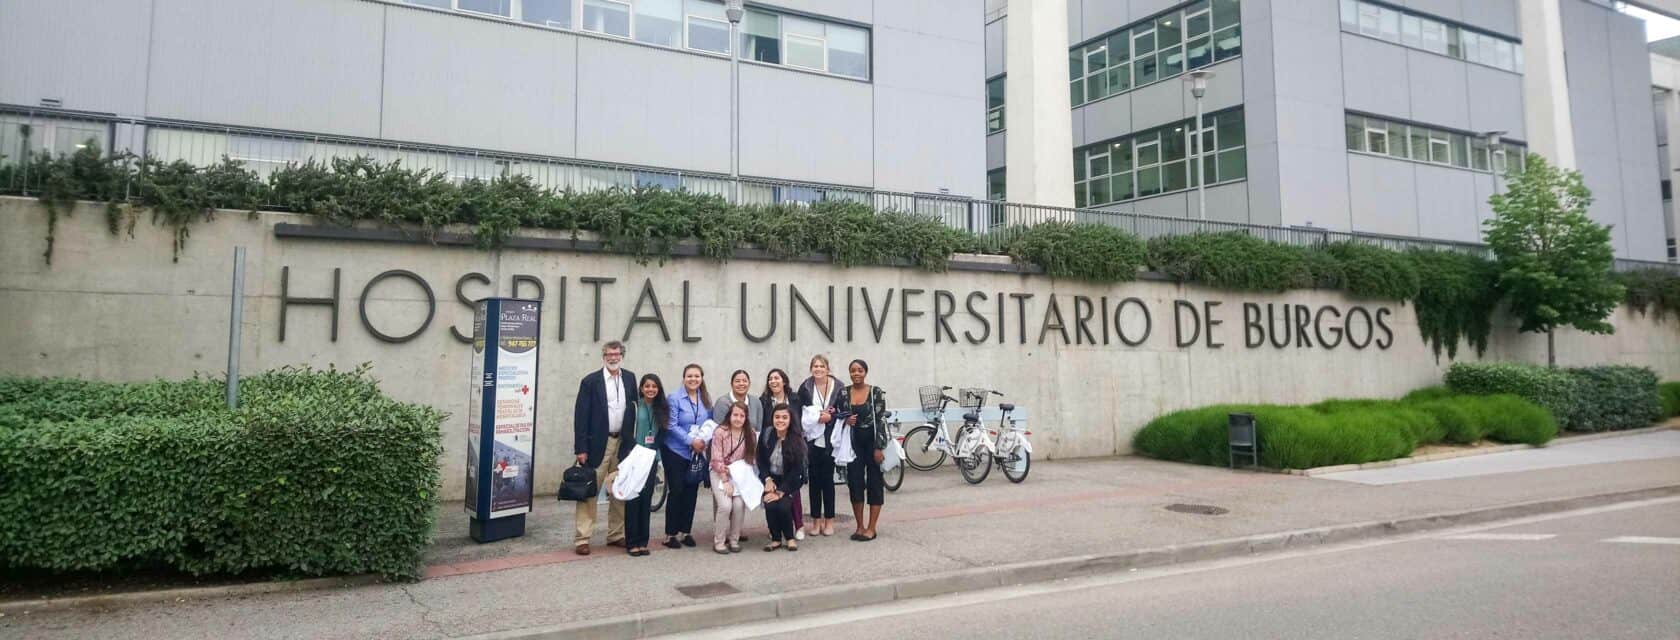 Atlantis students outside the hospital where they are shadowing.